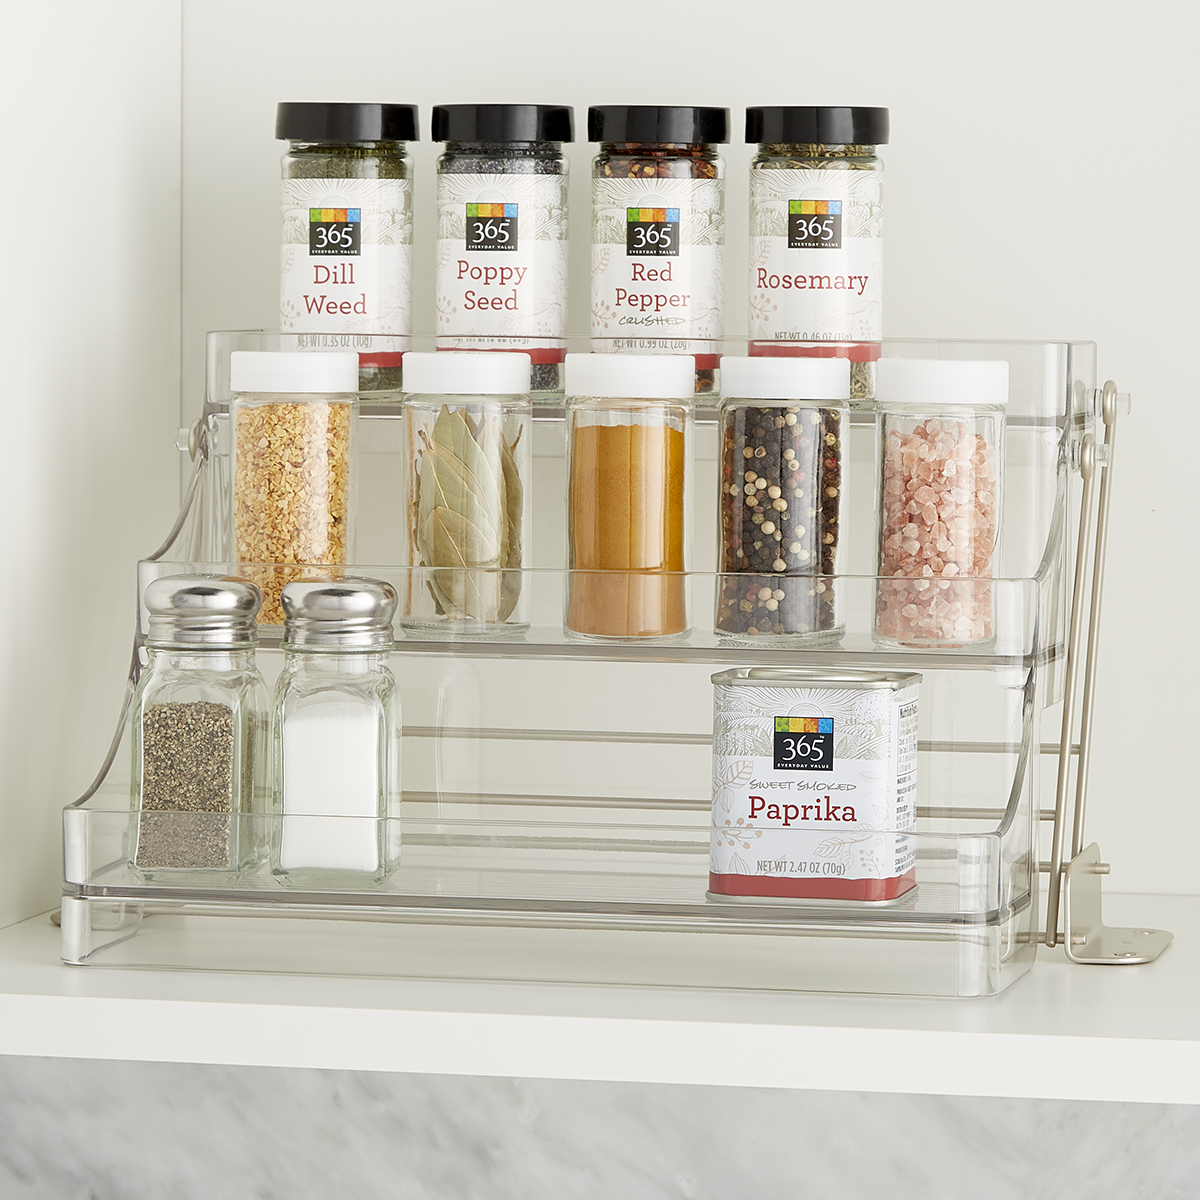 https://www.containerstore.com/catalogimages/335489/10073696-Linus-Easy-Reach-Spice-Rack.jpg